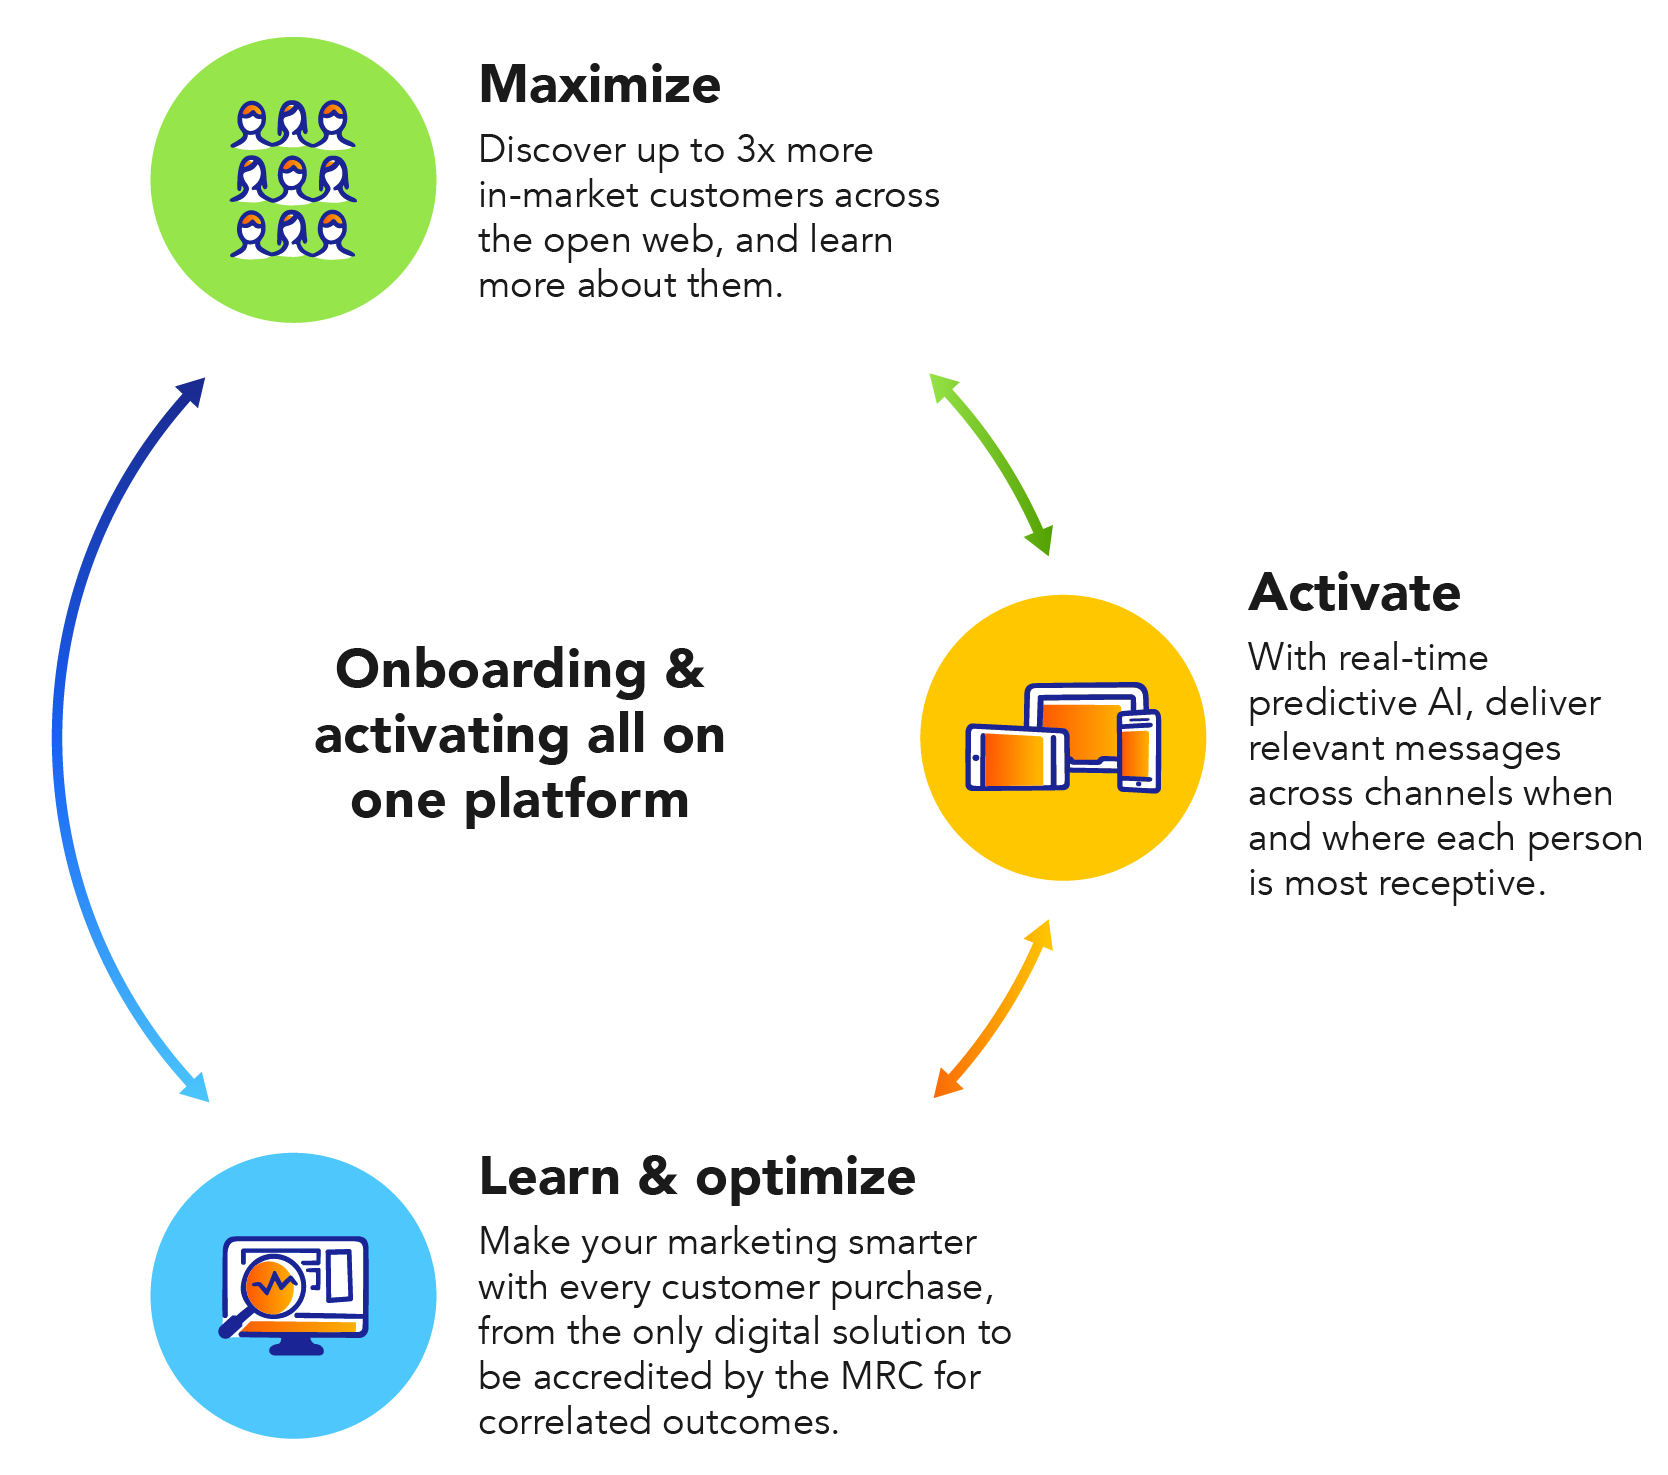 circular graphic showing how to maximize, activate, and learn & optimize on your data using the marketing agency services from Epsilon